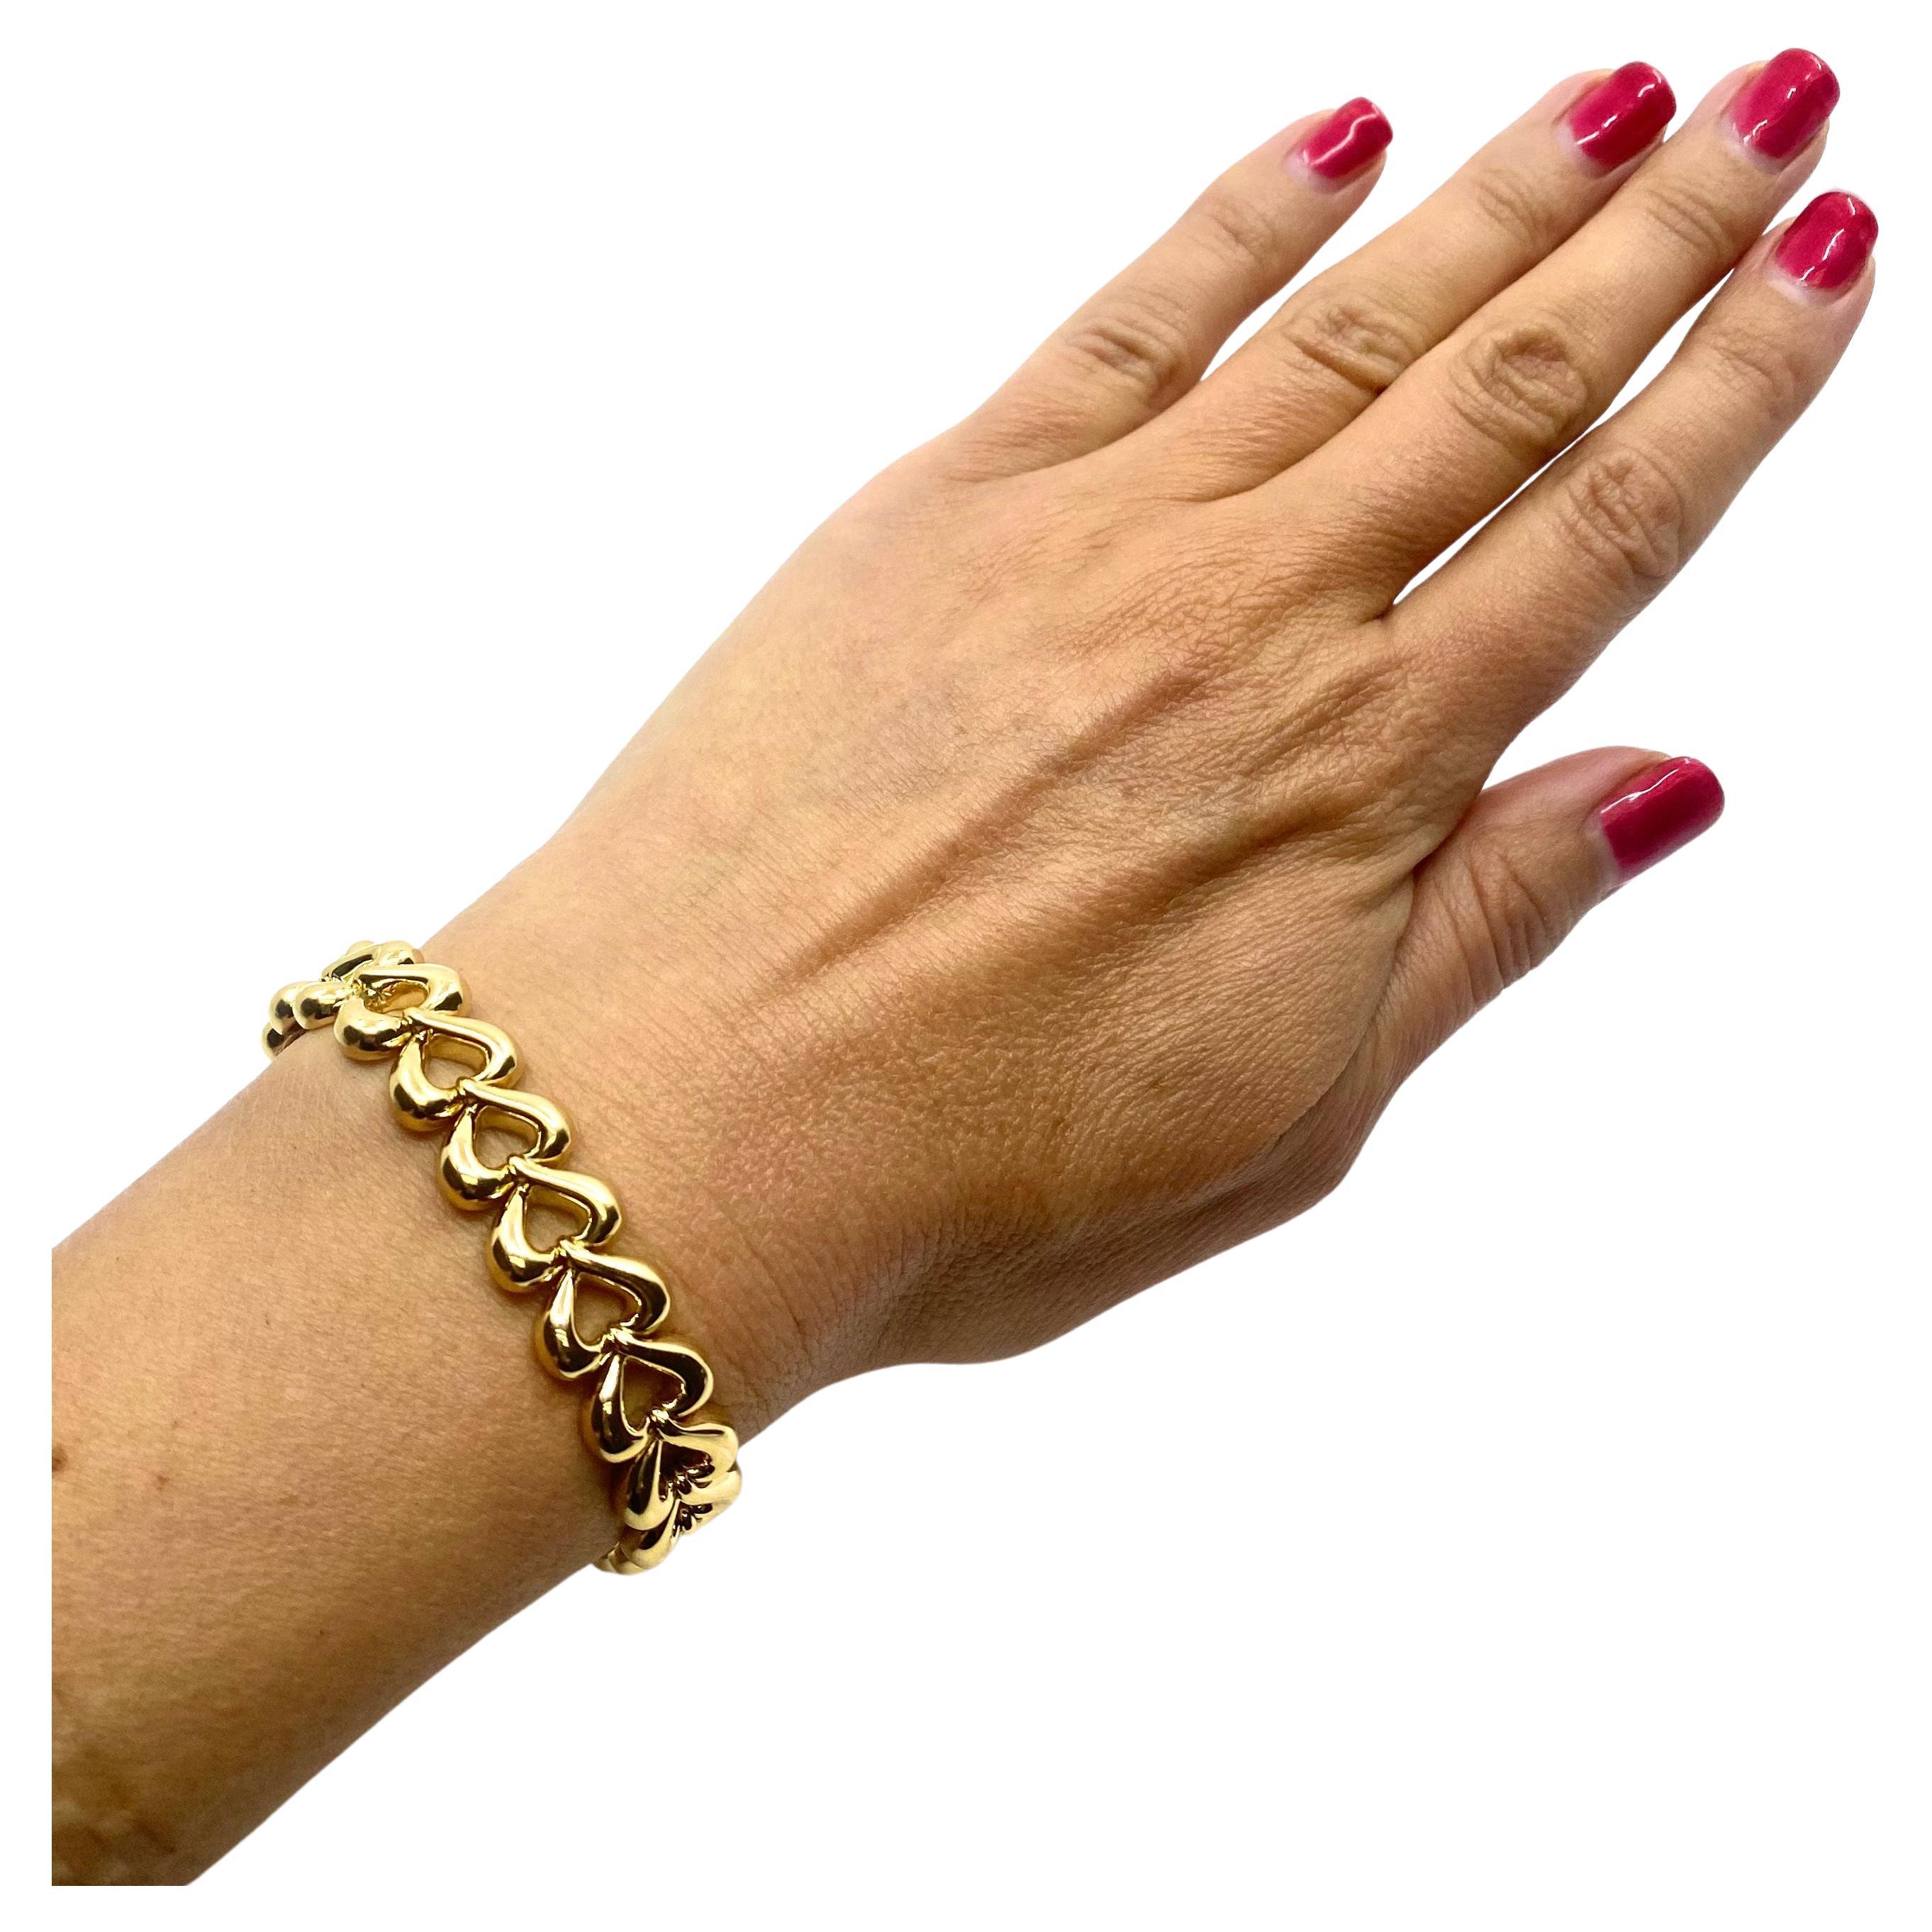 A glossy Van Cleef & Arpels 18k gold bracelet crafted of heart-shaped links. It’s a minimal yet chic piece that speaks volumes about feelings. The links are open work, and there is a cute little solid heart topping the clasp. This VCA gold bracelet